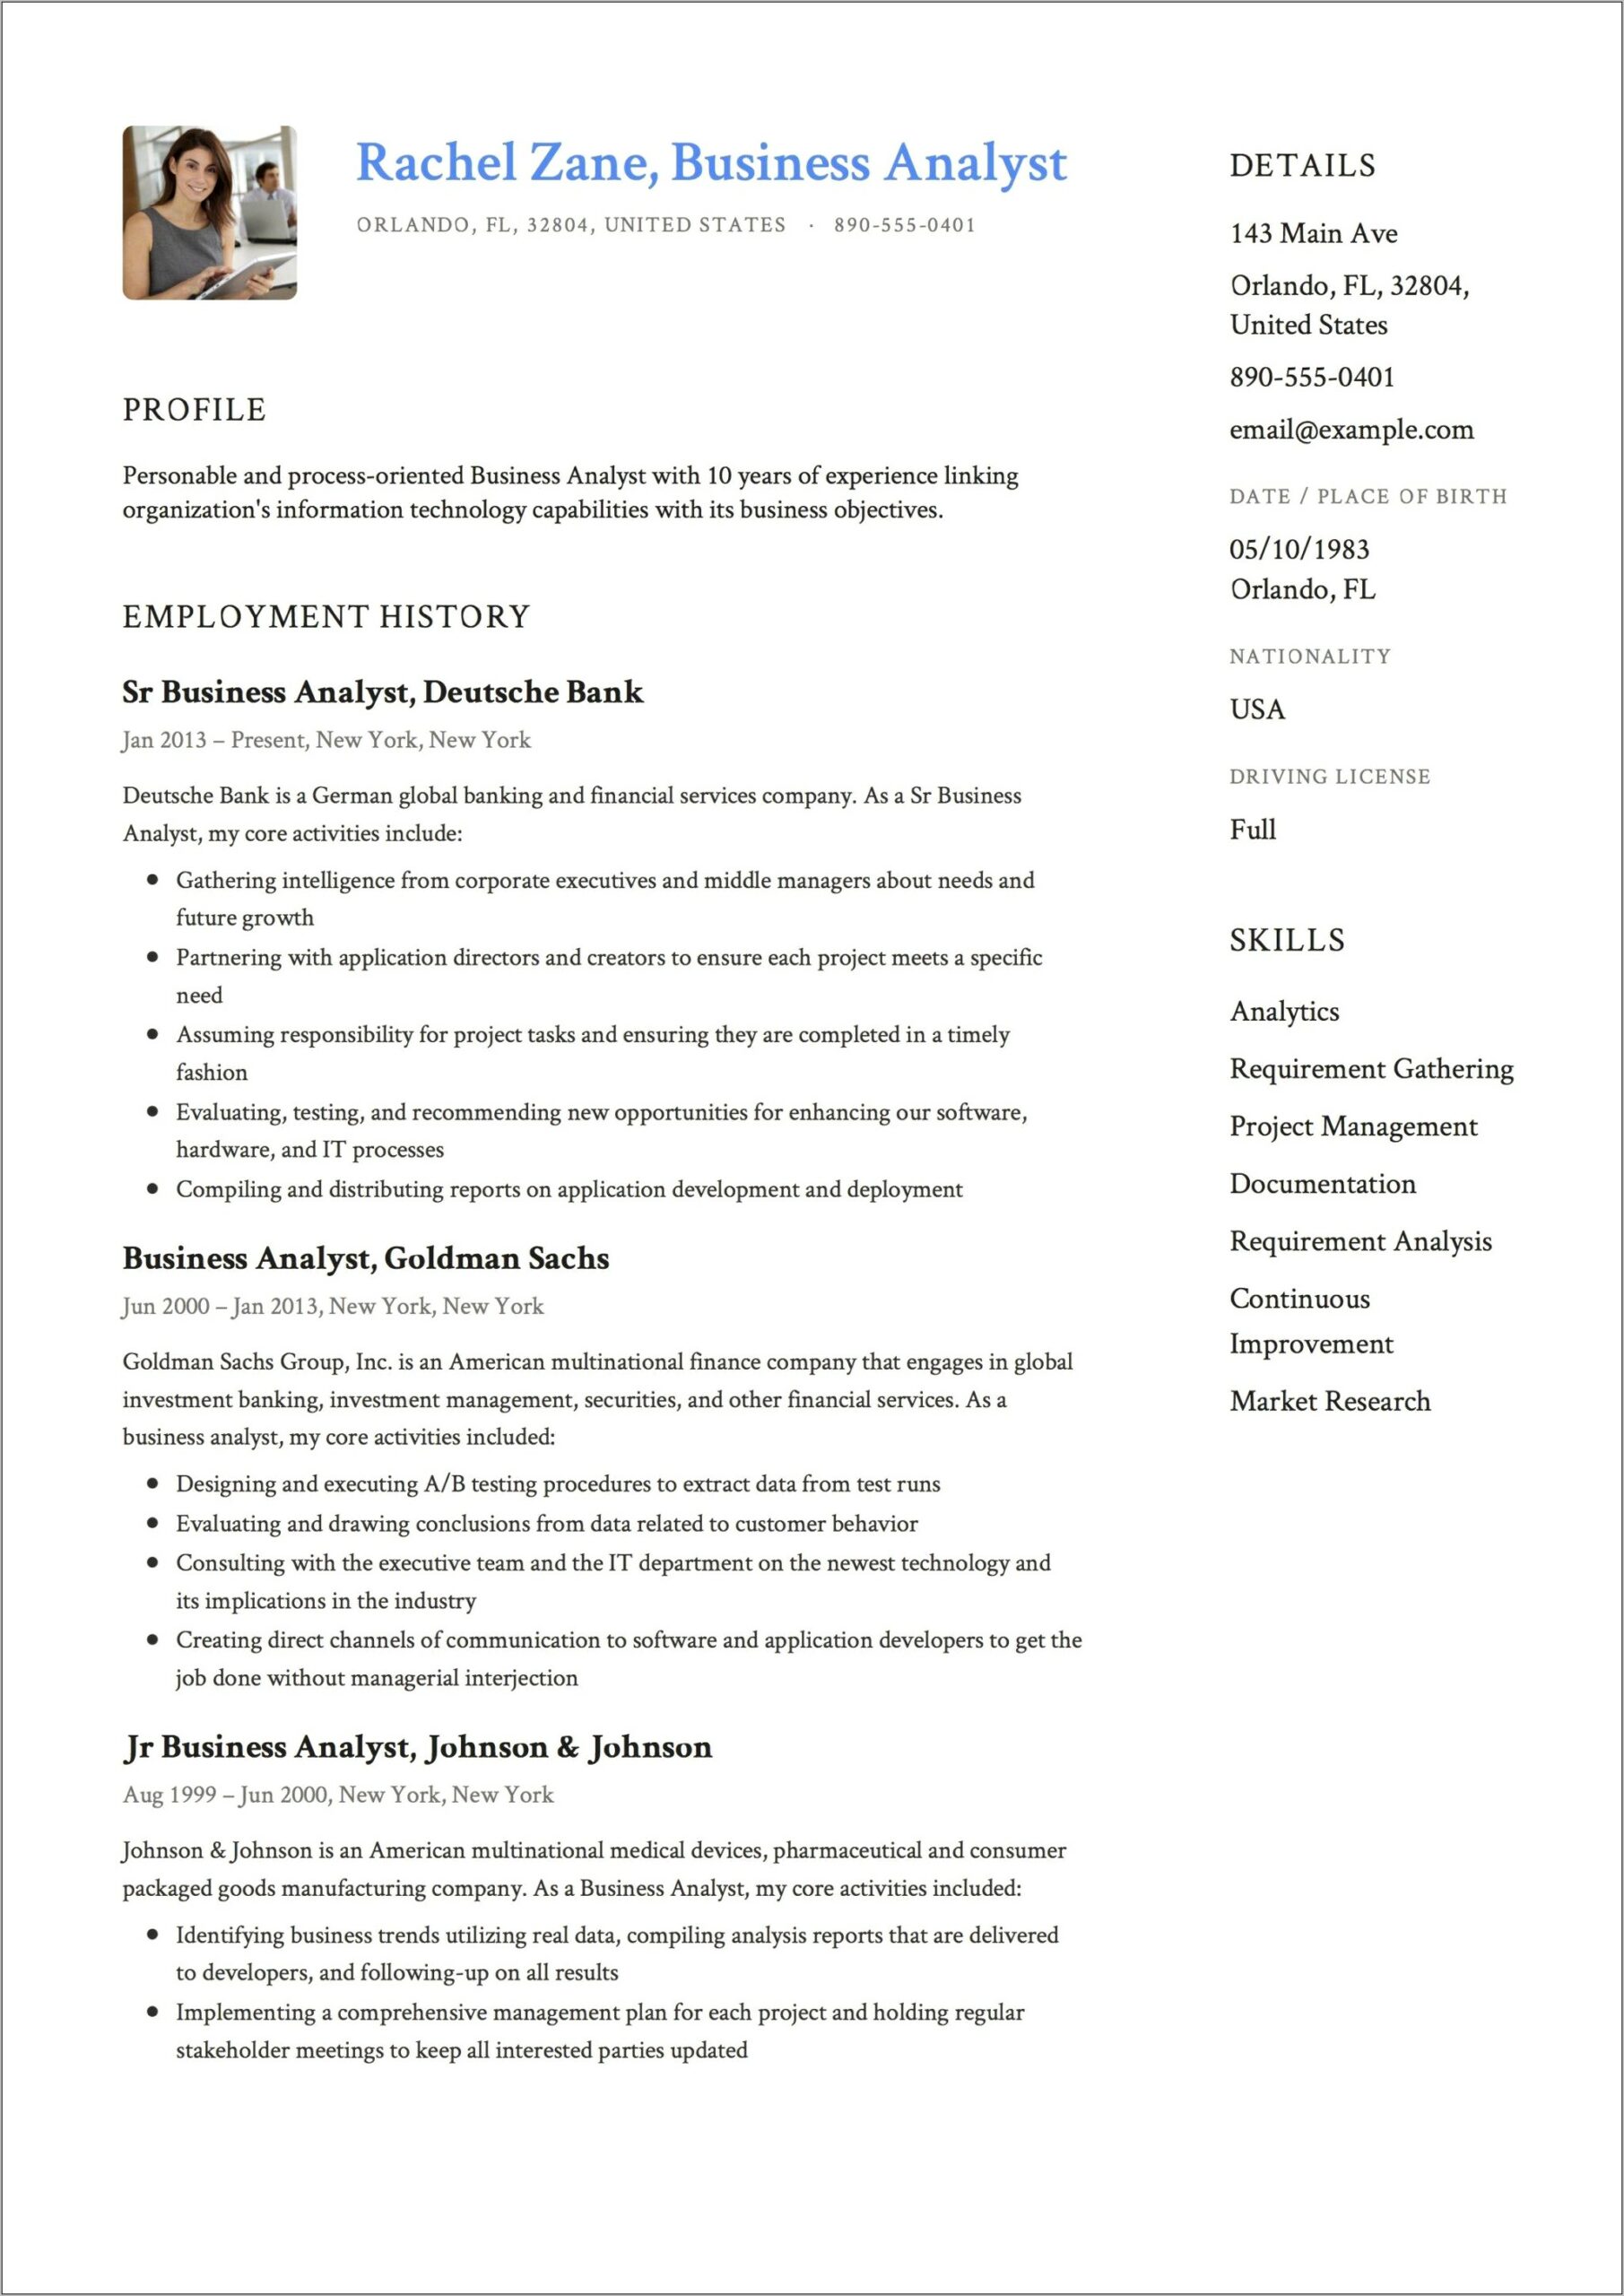 Business System Analyst Sample Resumes